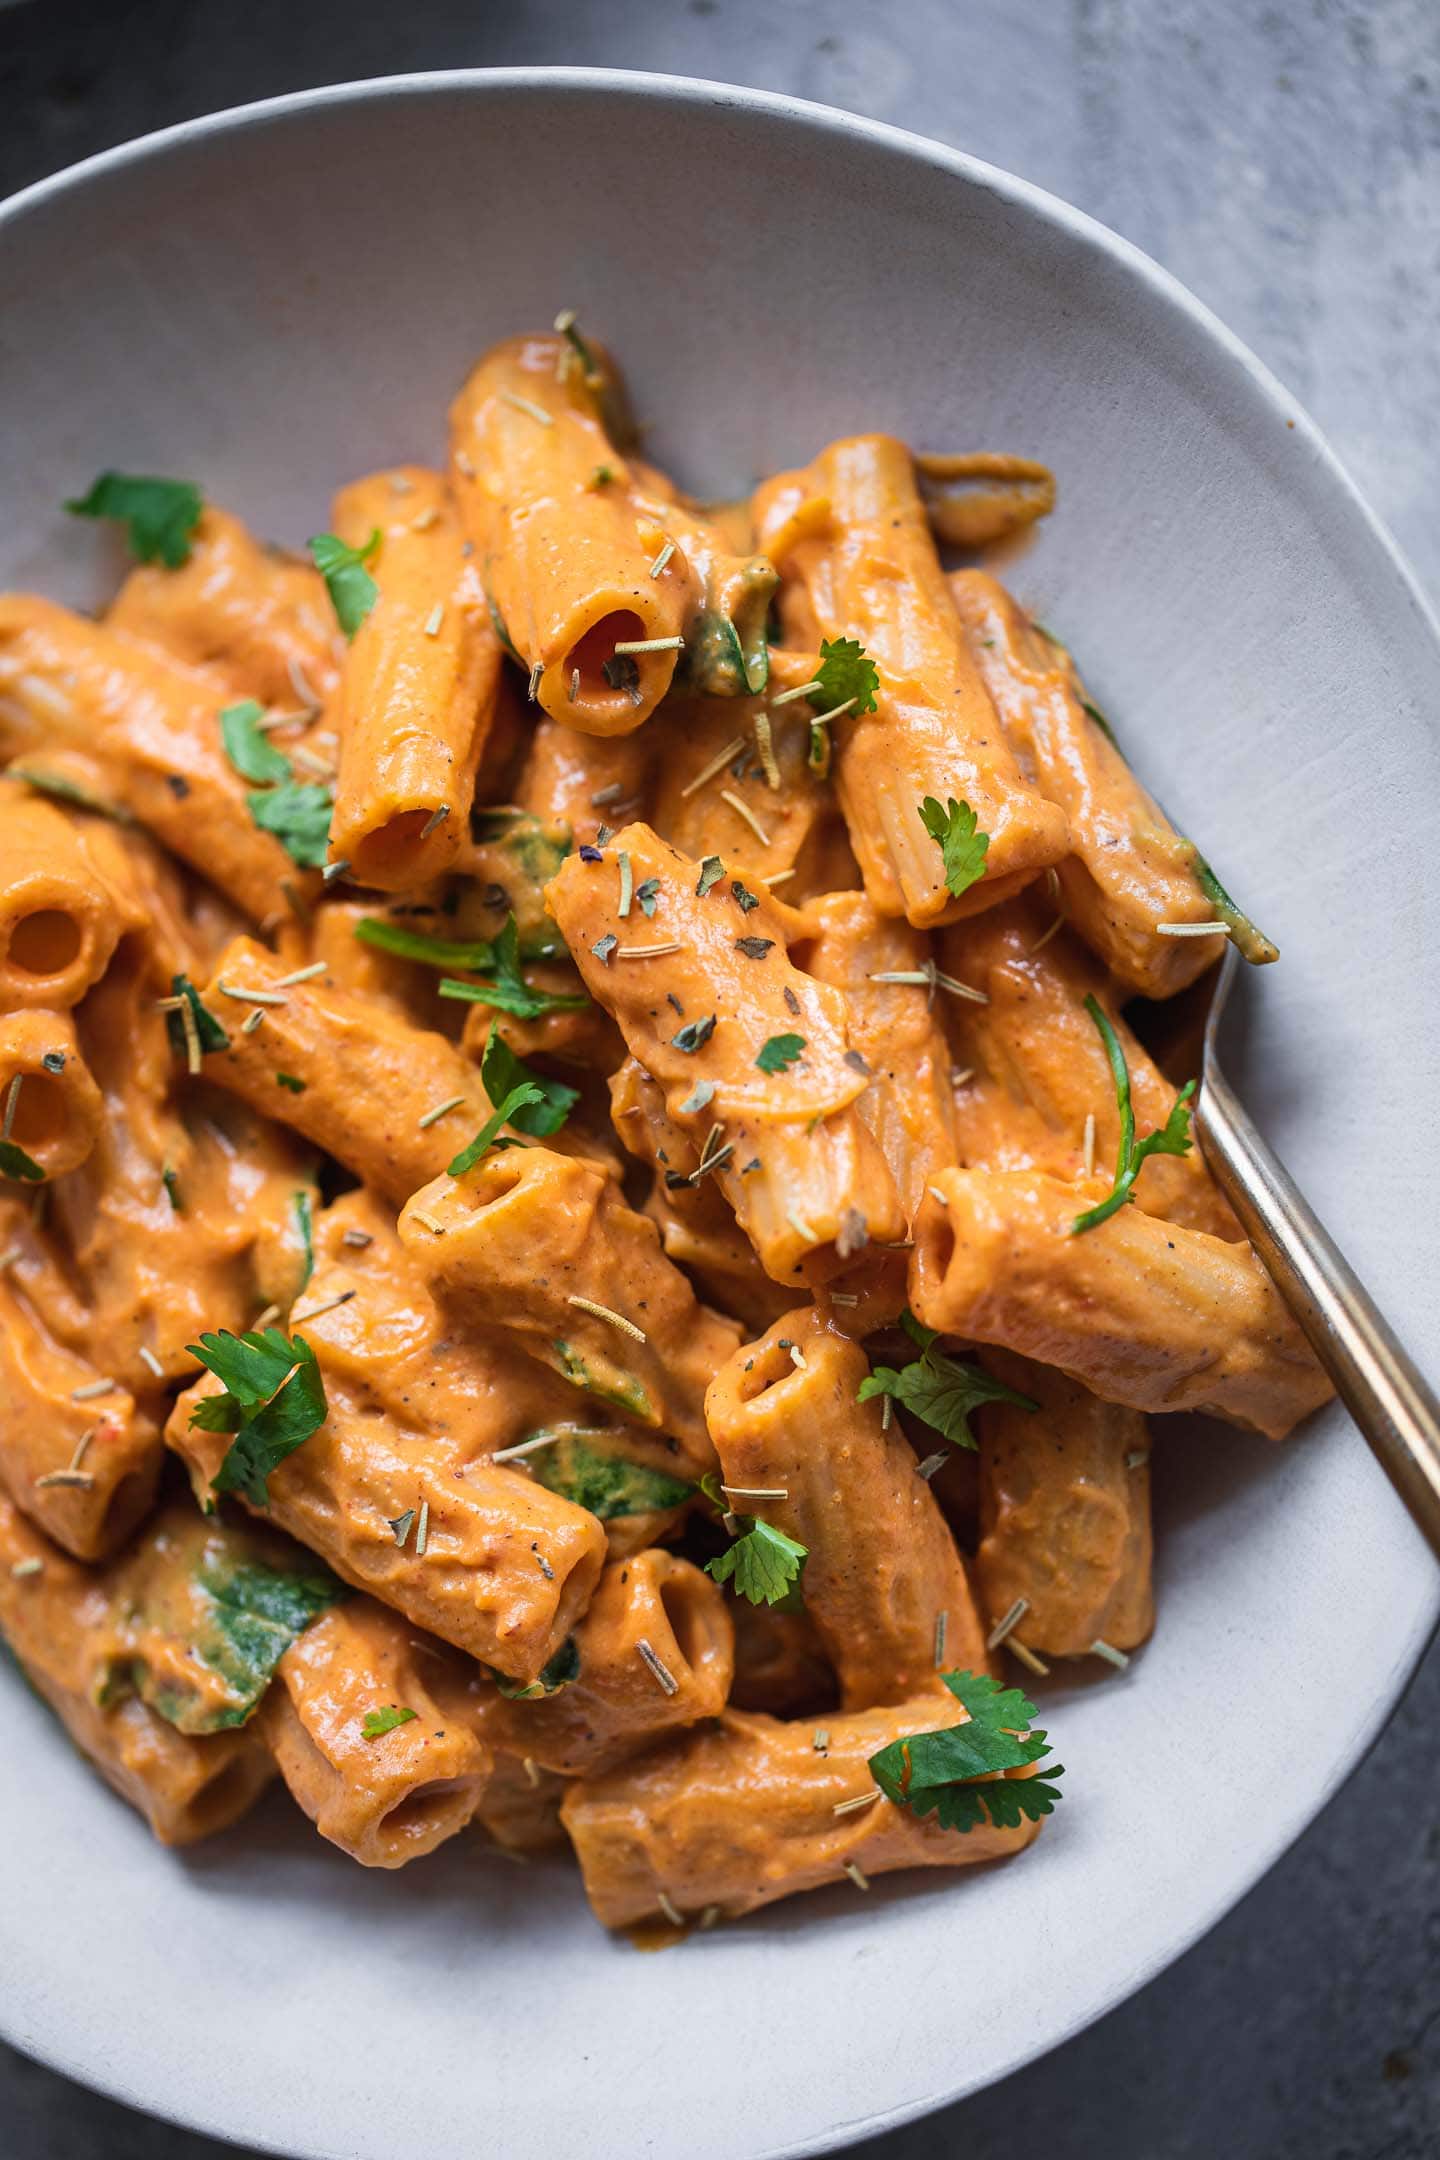 Bowl of rigatoni in a vegetable sauce